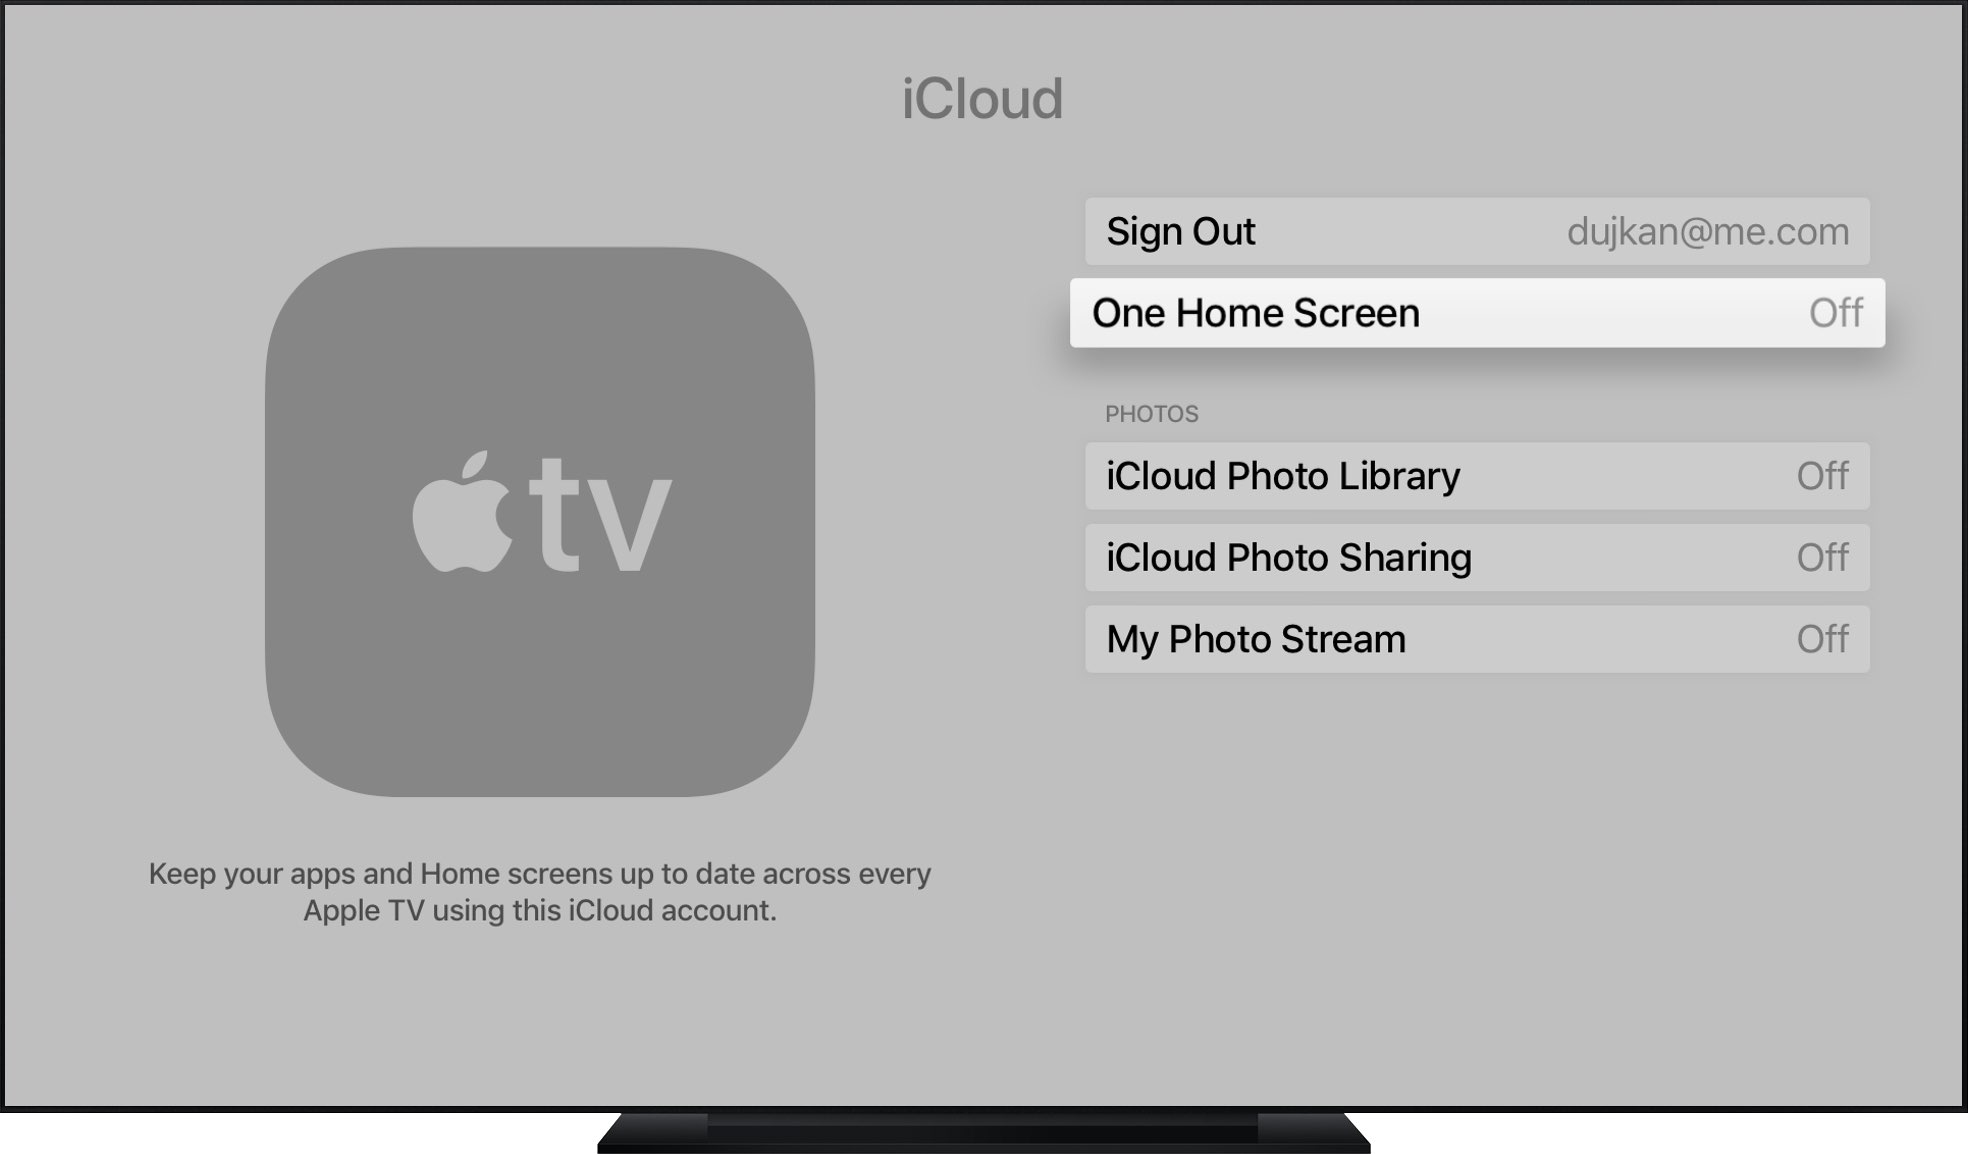 sikring Forkæl dig Børnepalads How to use Apple TV One Home Screen for multiple devices